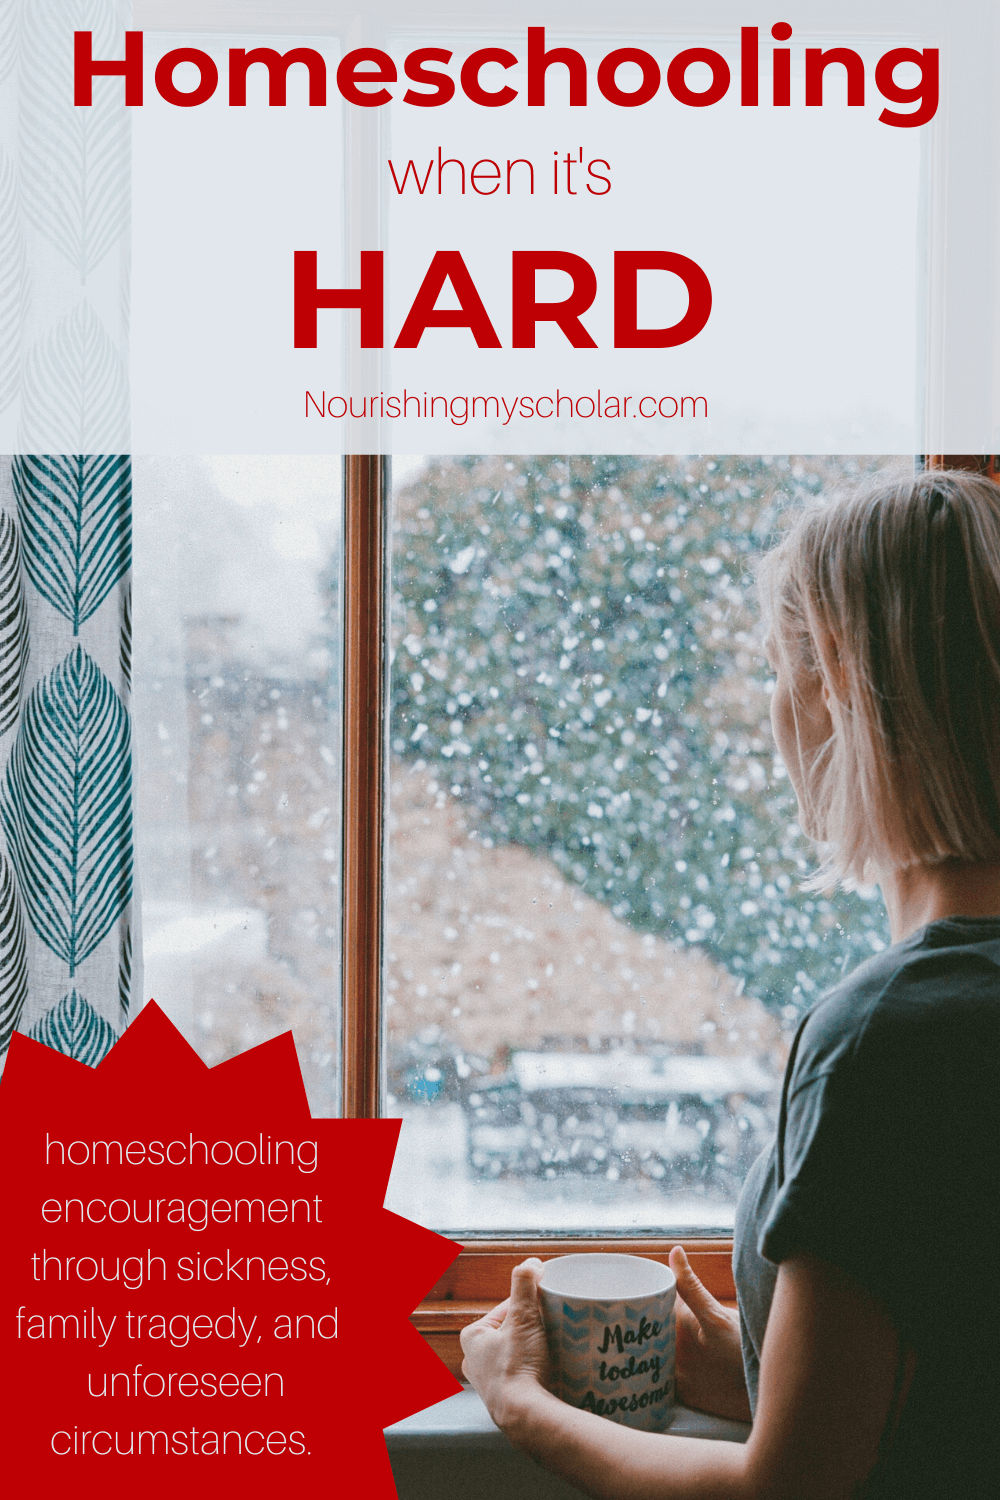 Homeschooling When it's Hard: The only way to approach hard homeschool days is to approach them one day at a time.  Try to stay present with your kiddos. Choose to connect with them every chance you get. #homeschool #homeschooling #homelearning #homeeducation #homeschoolmom #learningathome